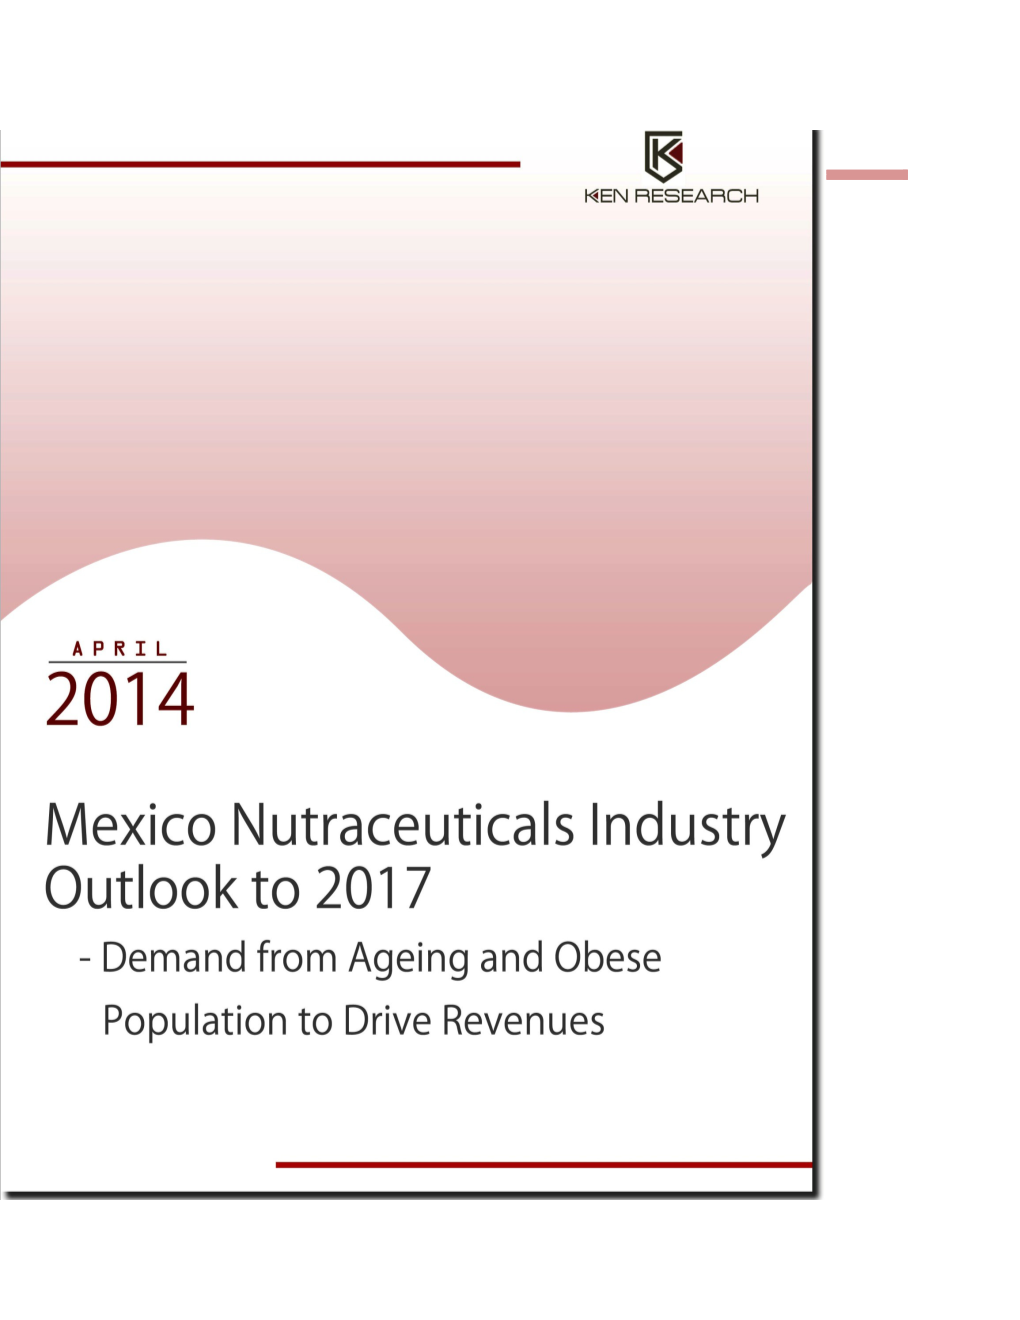 Mexico Nutraceuticals Industry Outlook to 2017